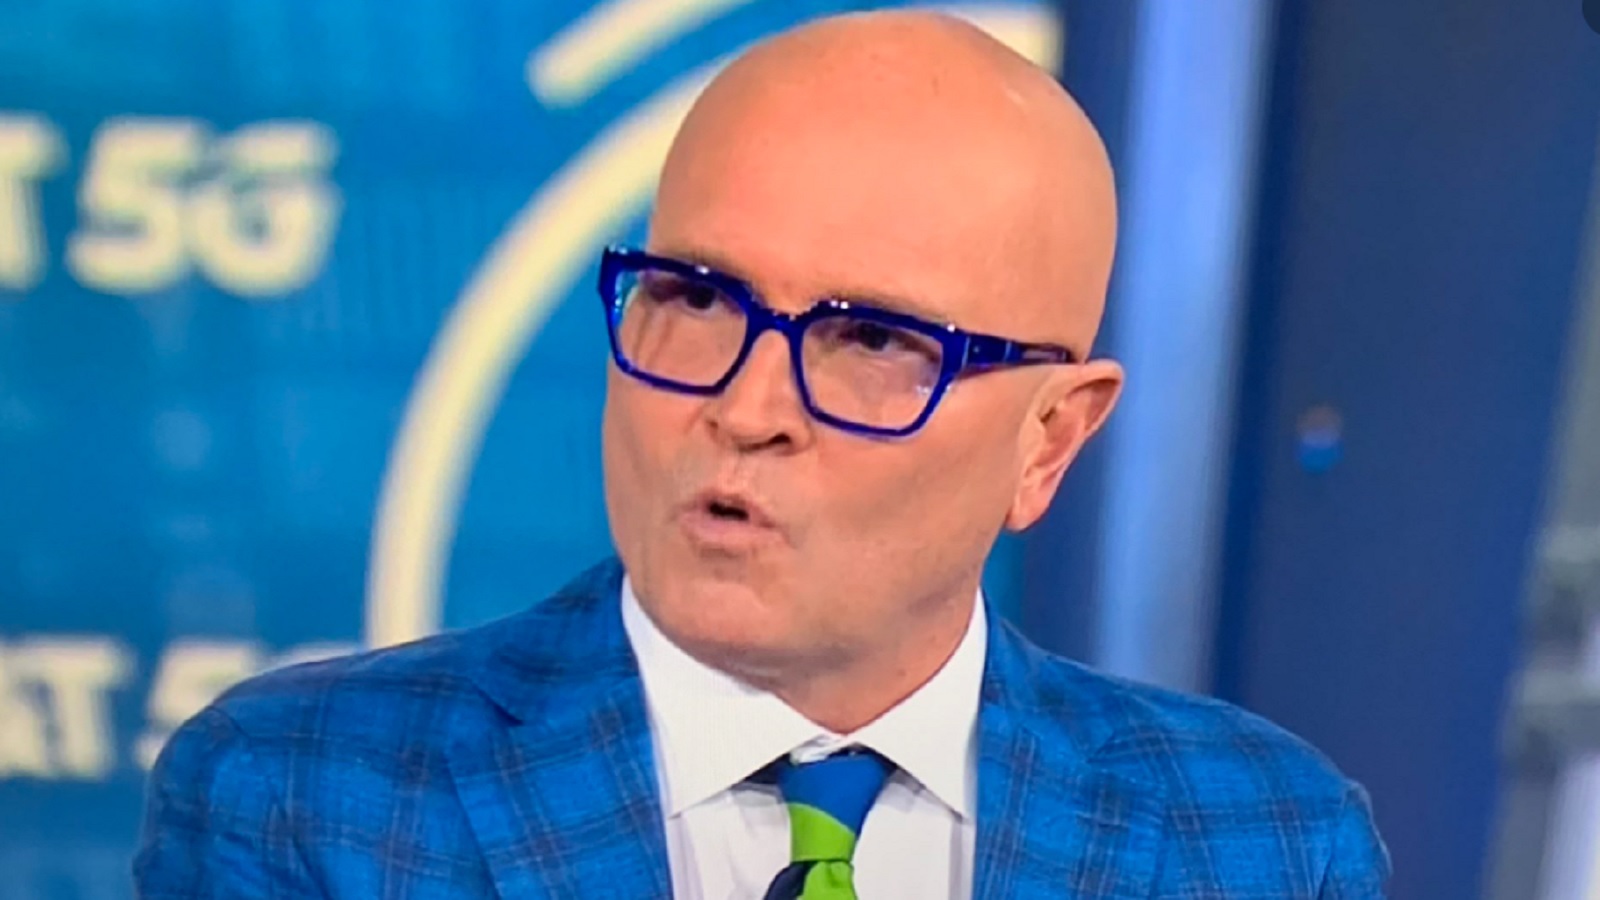 Why is ex-NBA star Rex Chapman joining CNN - what will he be doing?